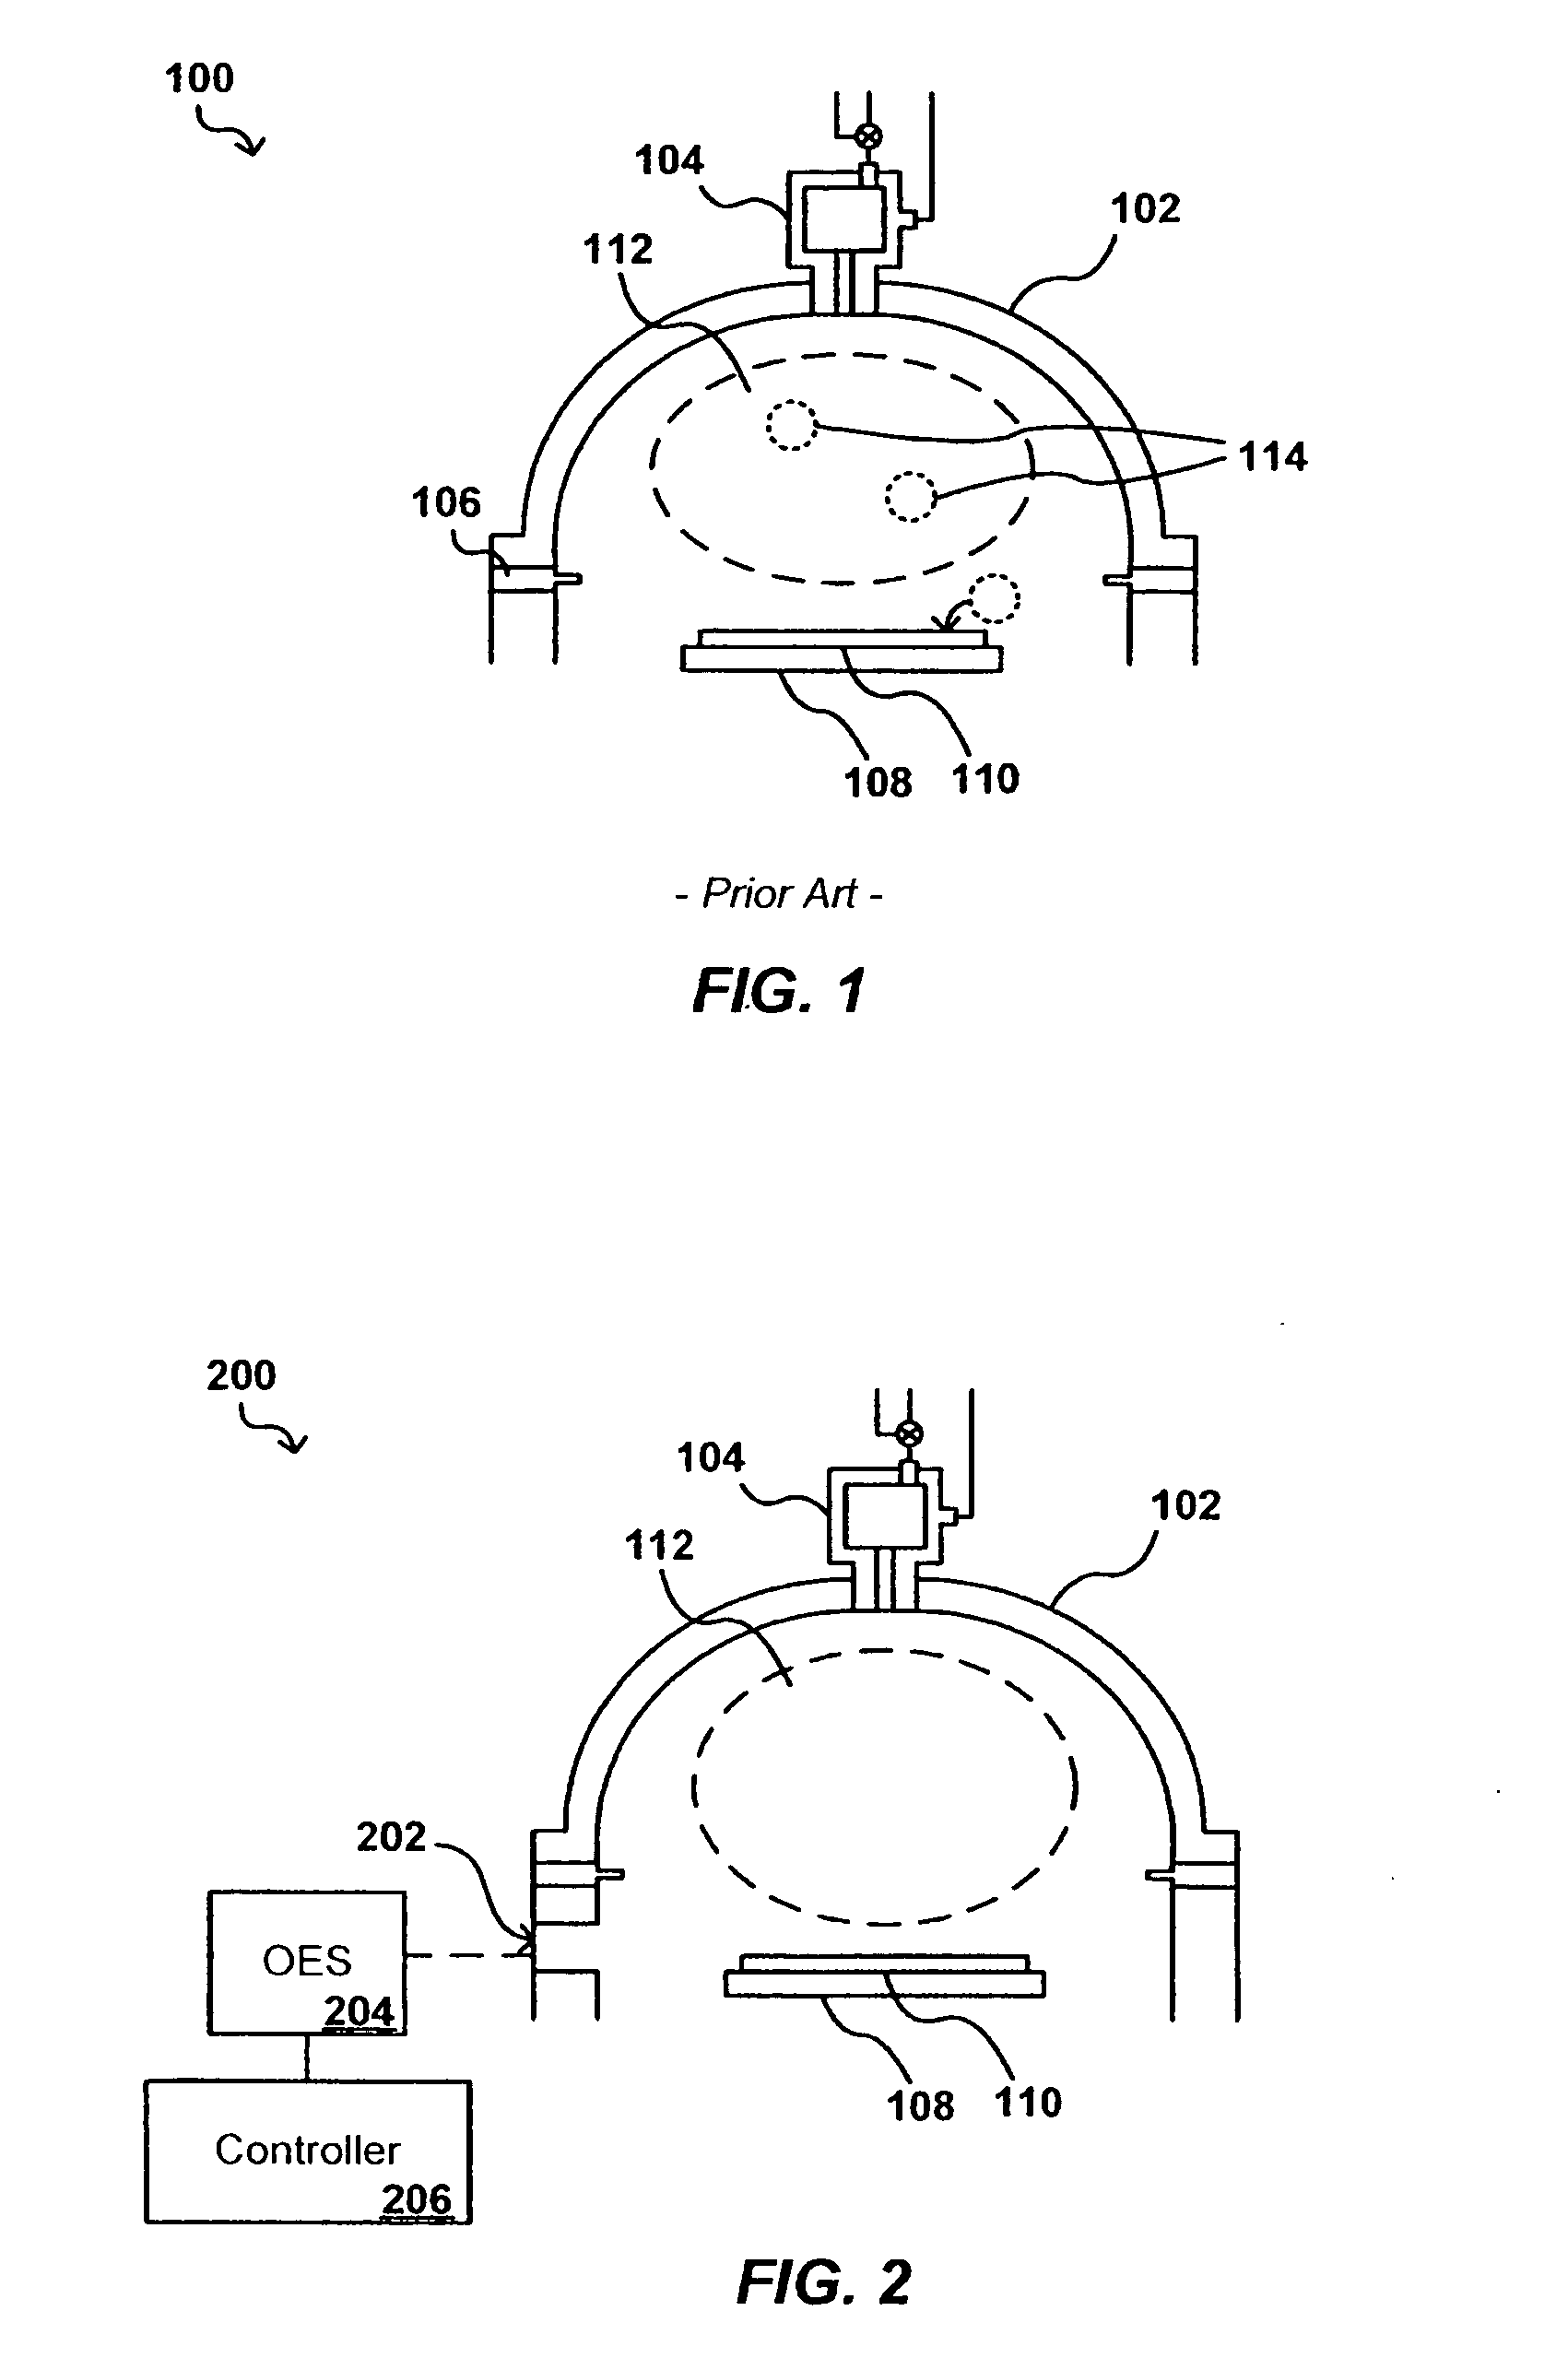 In-situ process state monitoring of chamber